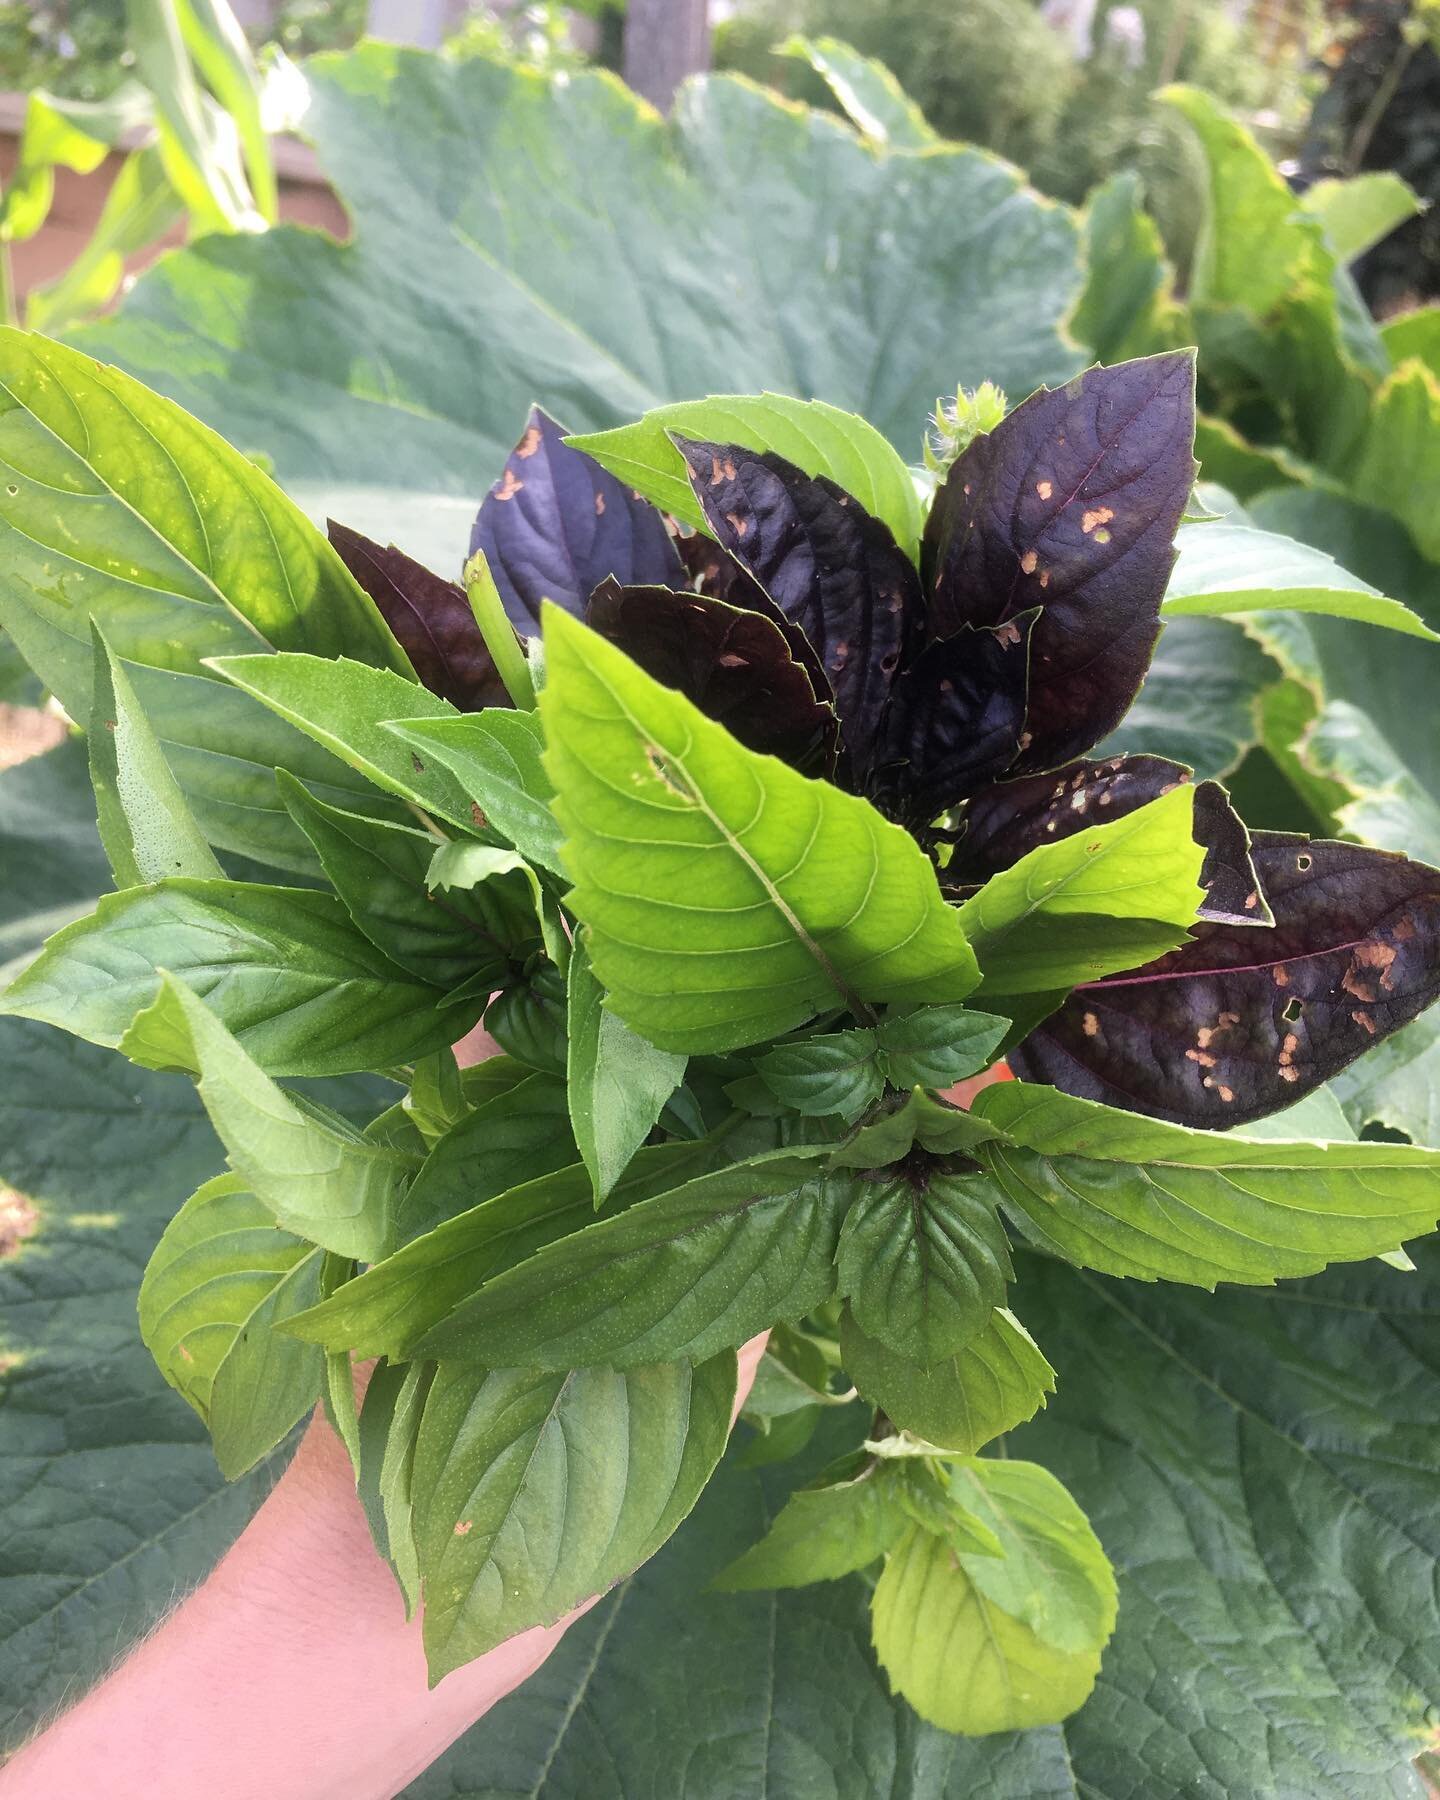 Kitchen Garden feature - 
The Kitchen Gardeners have been nurturing an amazing array of basil species in amongst their various tomato plants that are growing vertically in one of their beds. 
hmmm indeed! Blue Spice, Cinnamon, Lime, Mrs Burns Lemon a